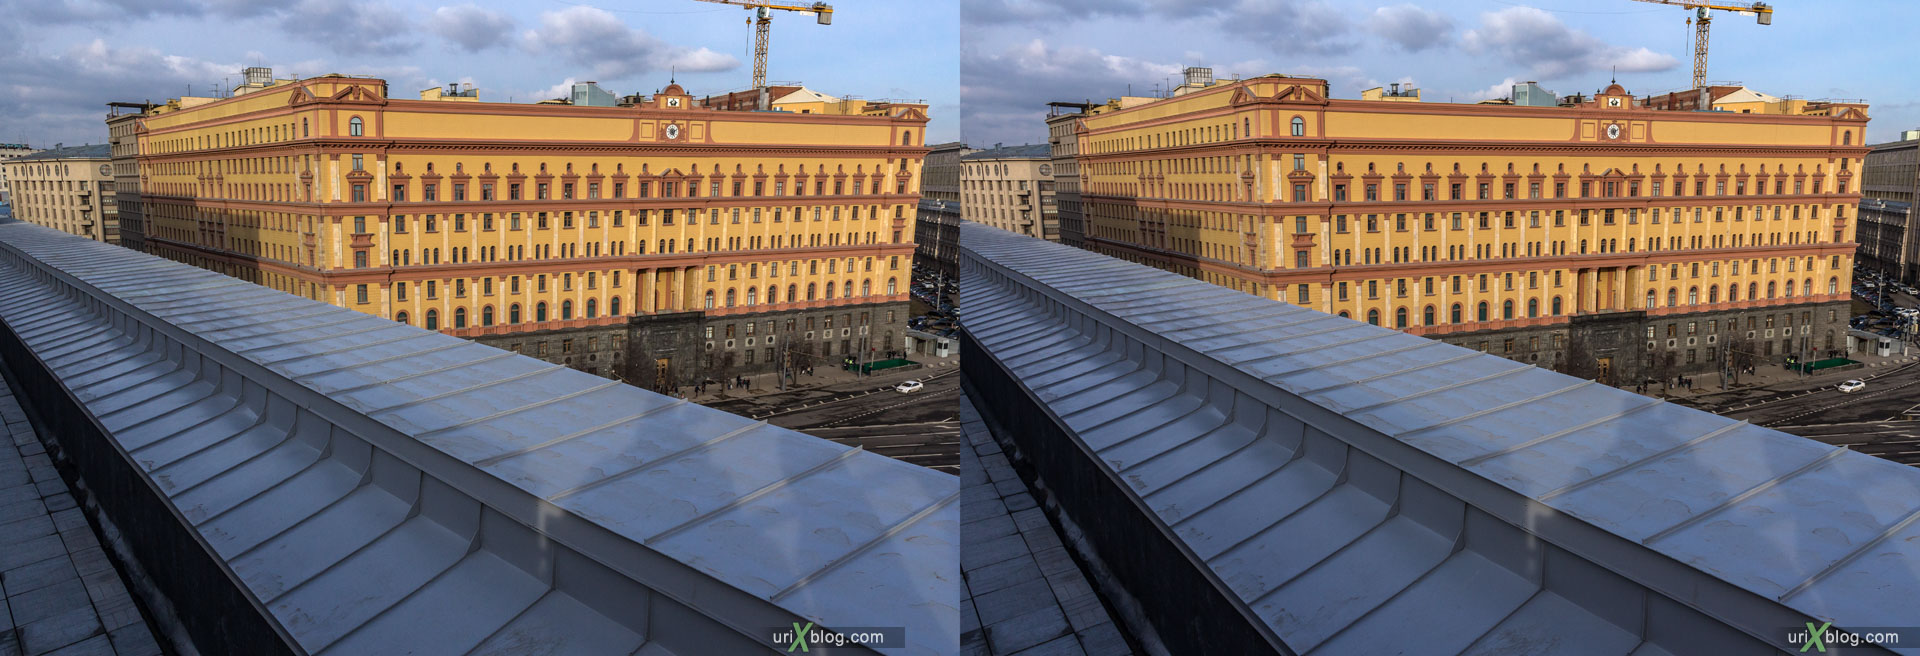 FSB, KGB, Central Childrens World, Shop, Store, Lubyanskaya square, Moscow, Russia, 3D, stereo pair, cross-eyed, crossview, cross view stereo pair, stereoscopic, 2015